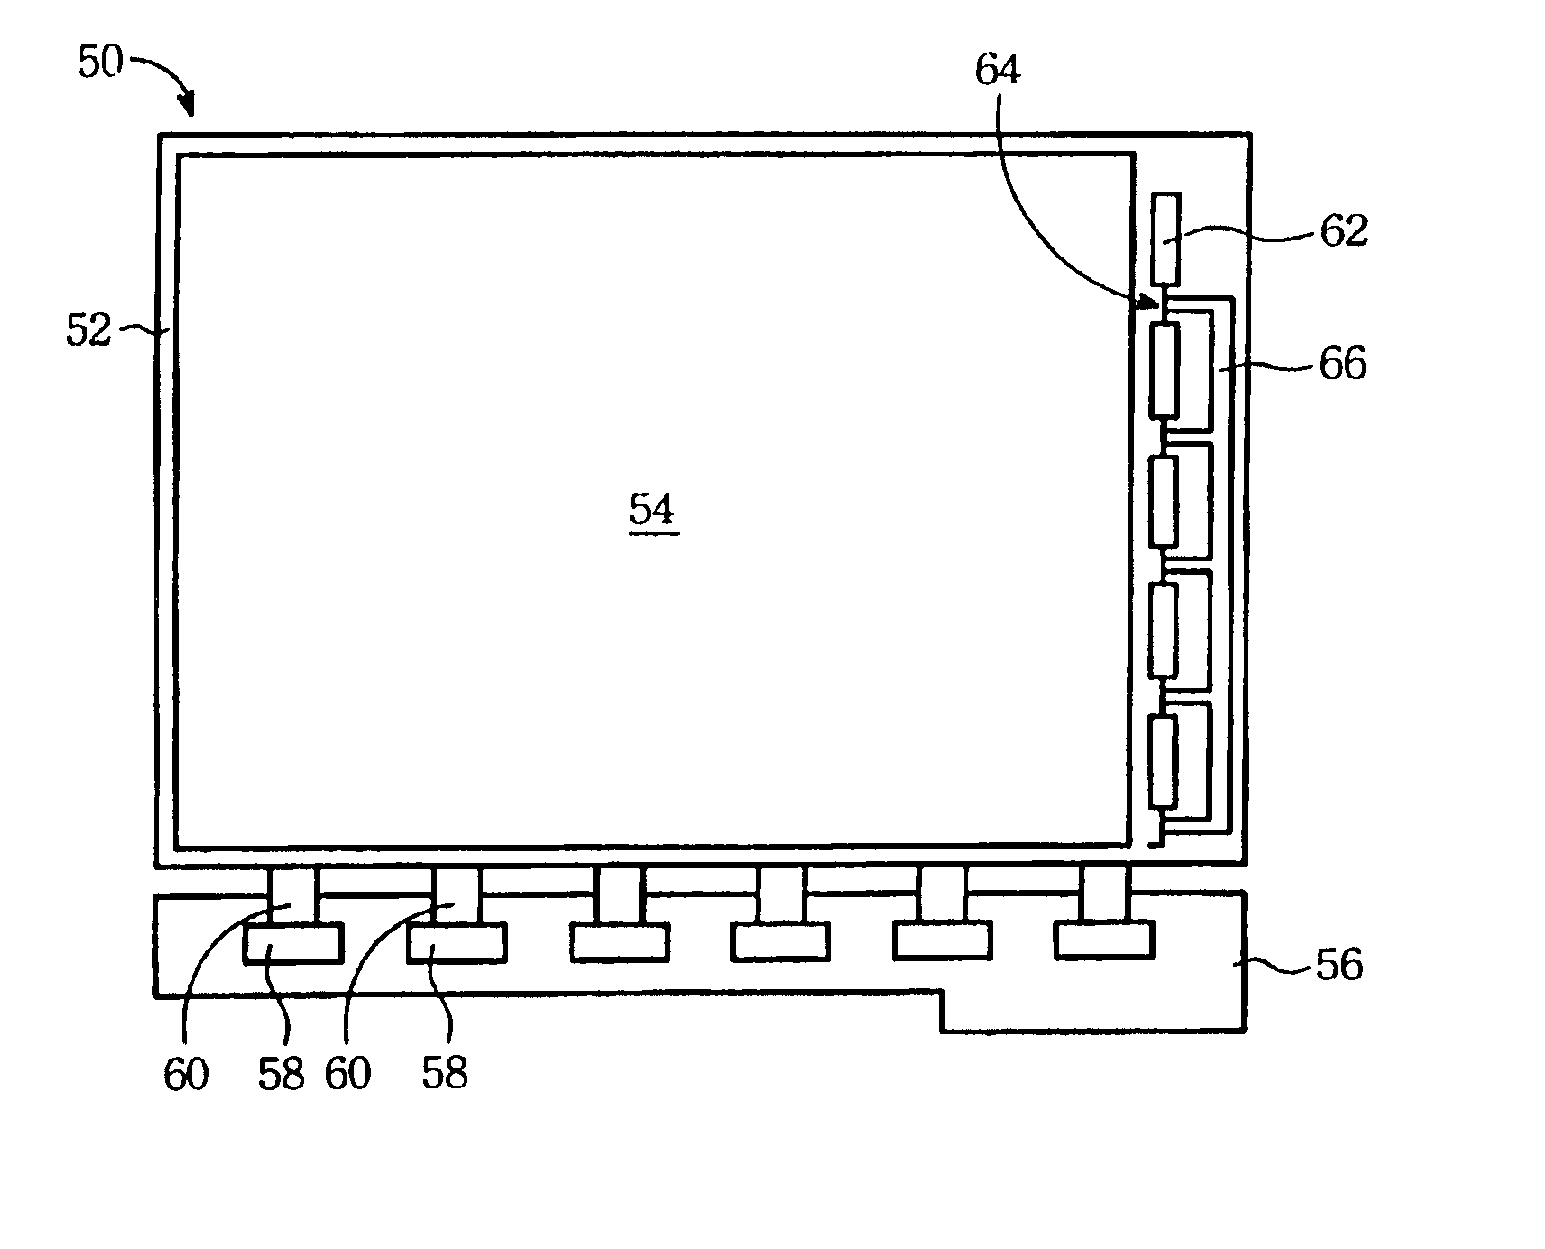 Display panel with bypassing lines